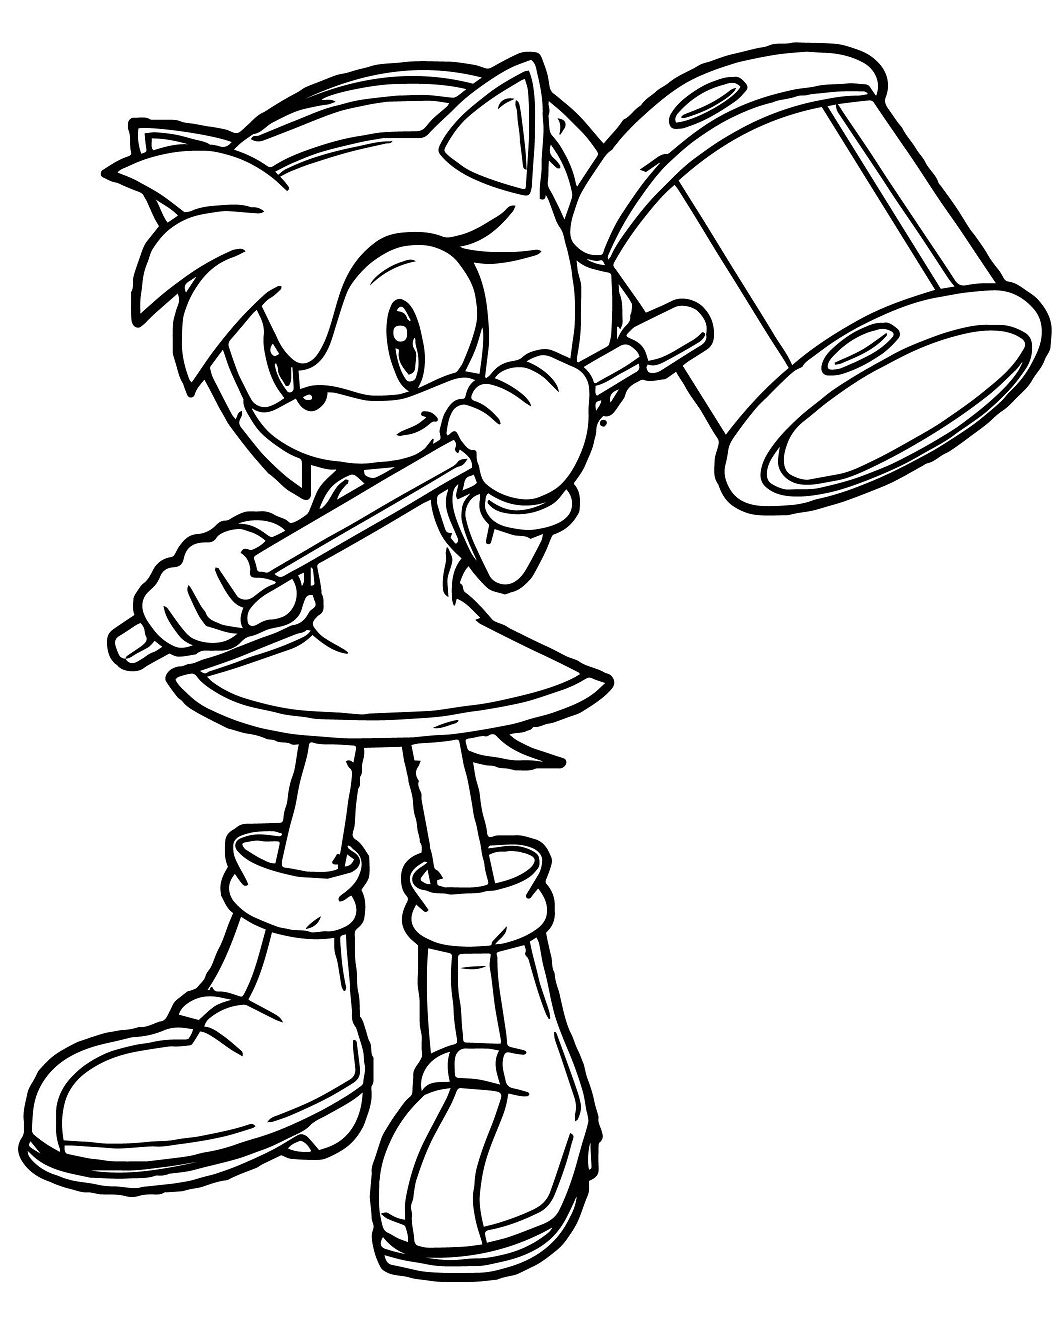 Amy Rose With Hammer Coloring Page - Free Printable Coloring Pages for Kids